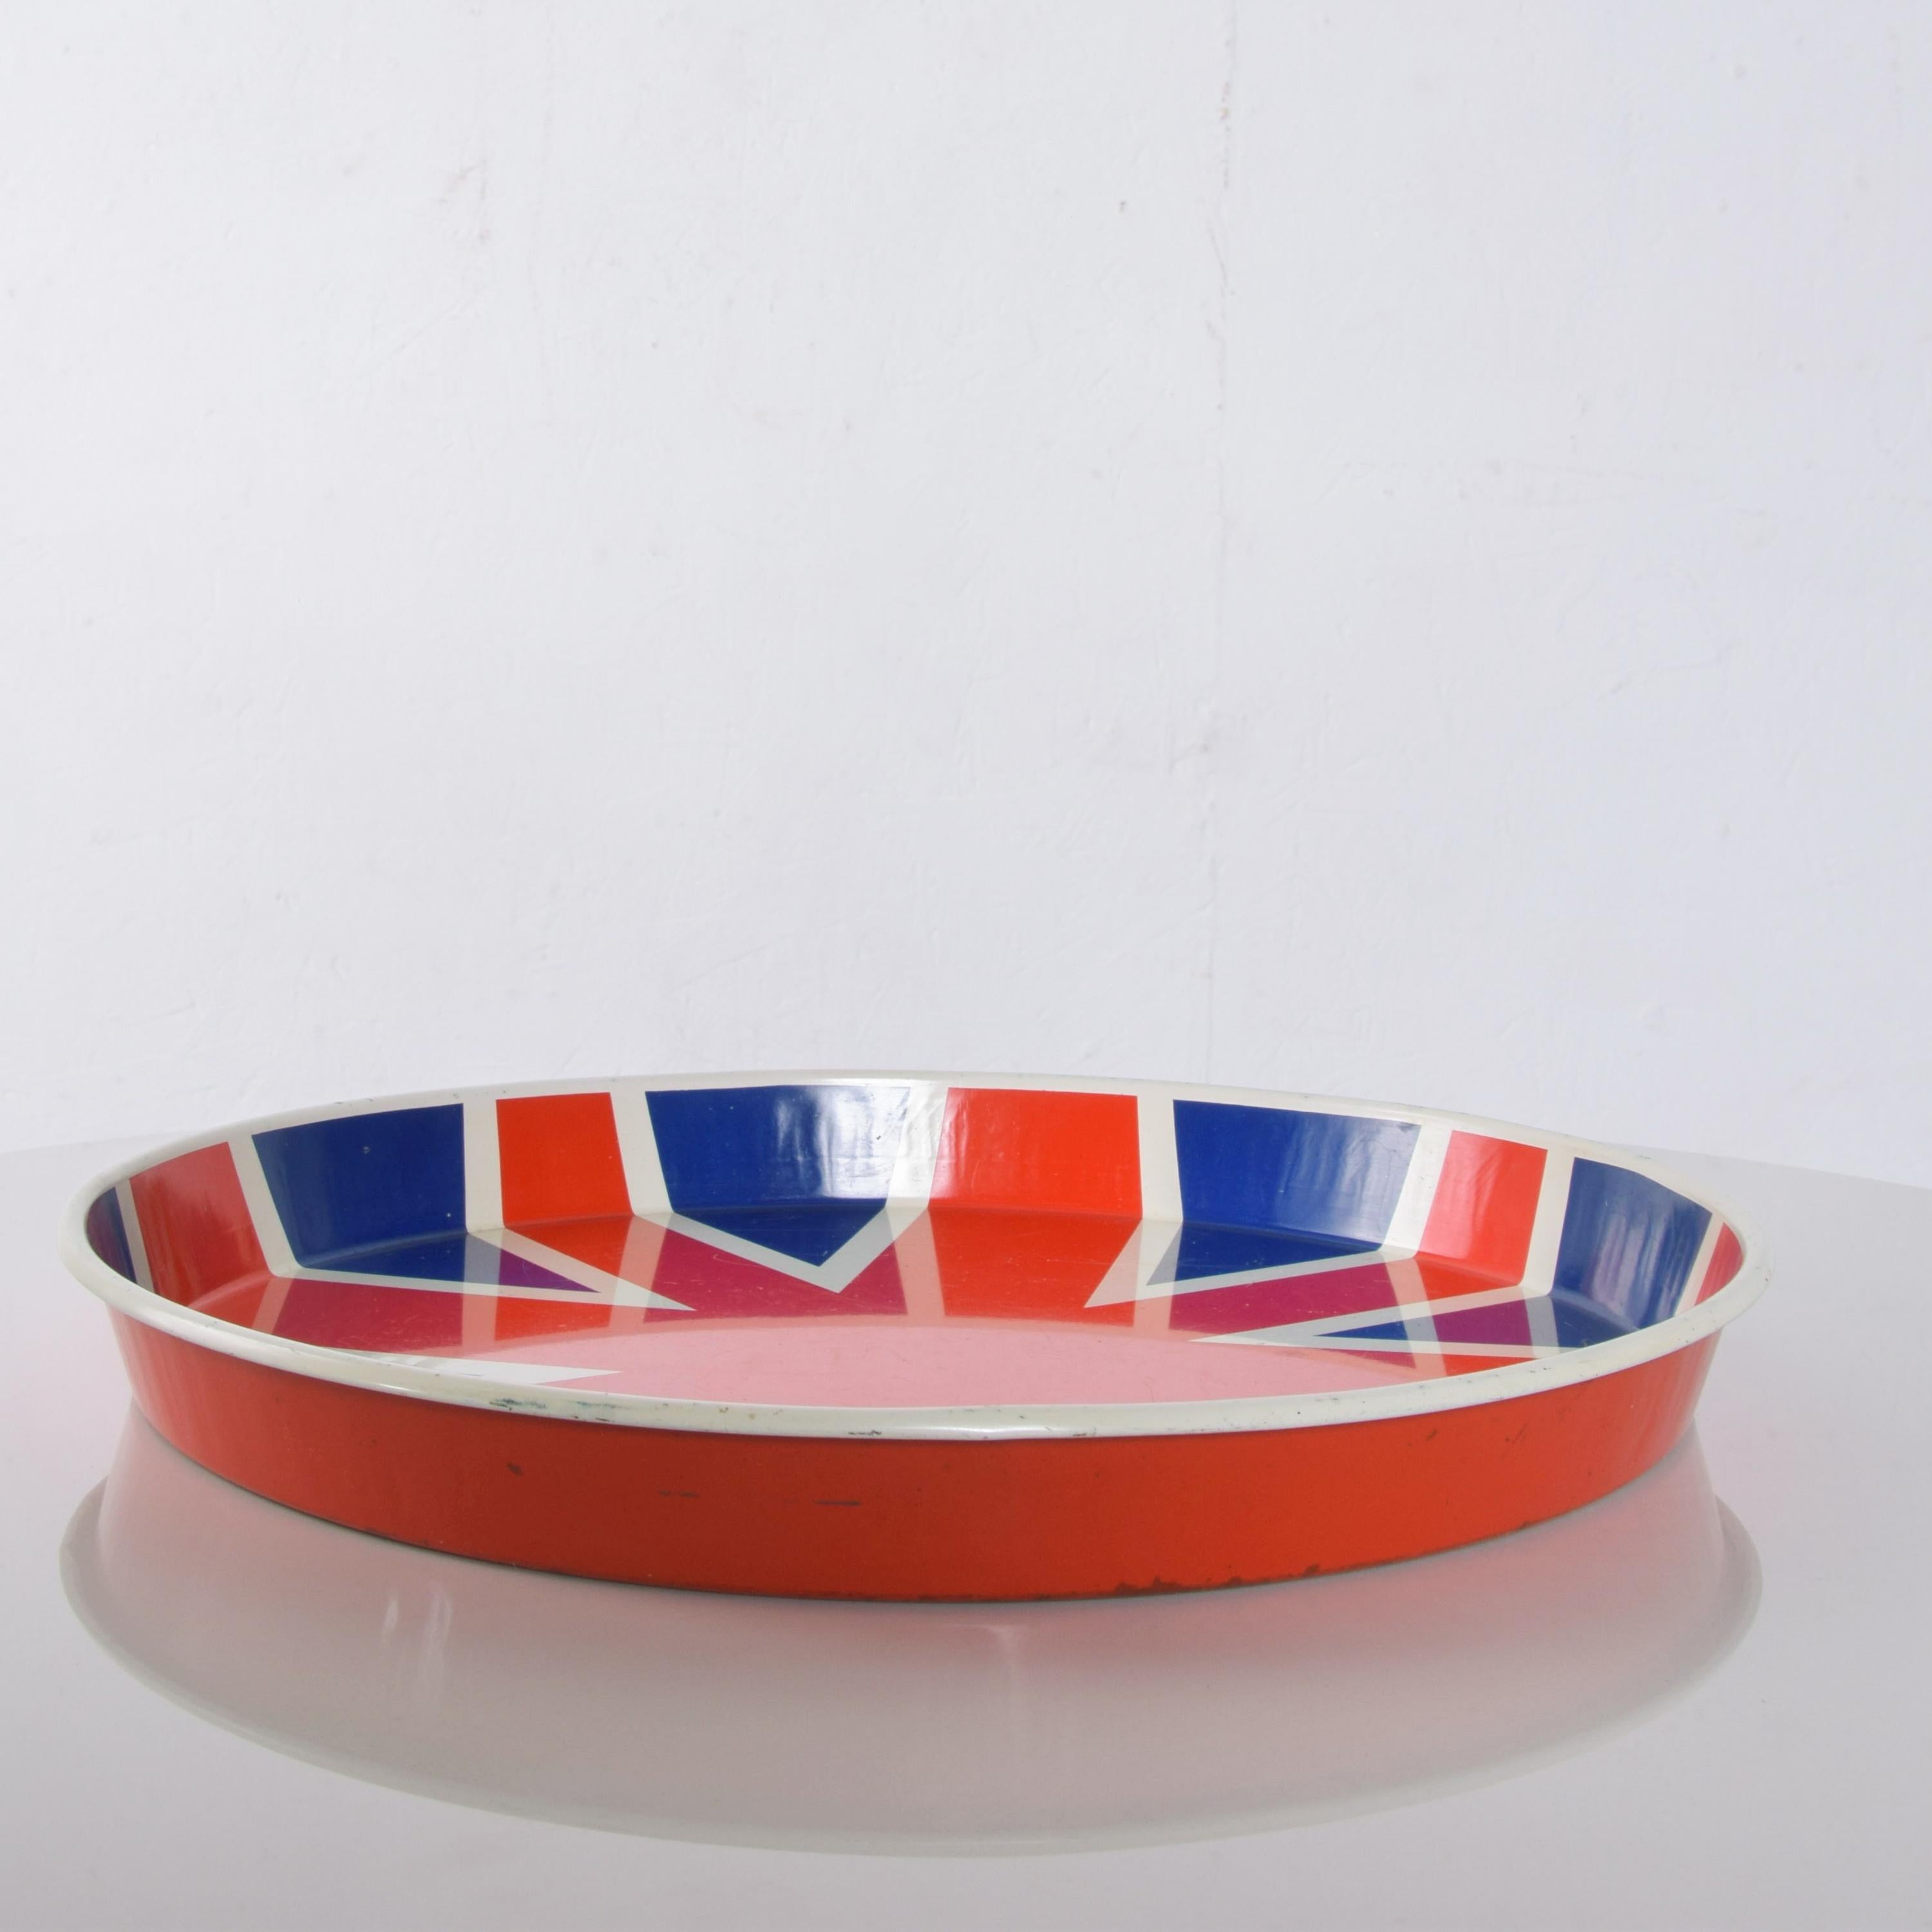 Vintage midcentury UNION JACK flag metal service tray made in England by Reginald Corfield DUCOR
Measures: 12